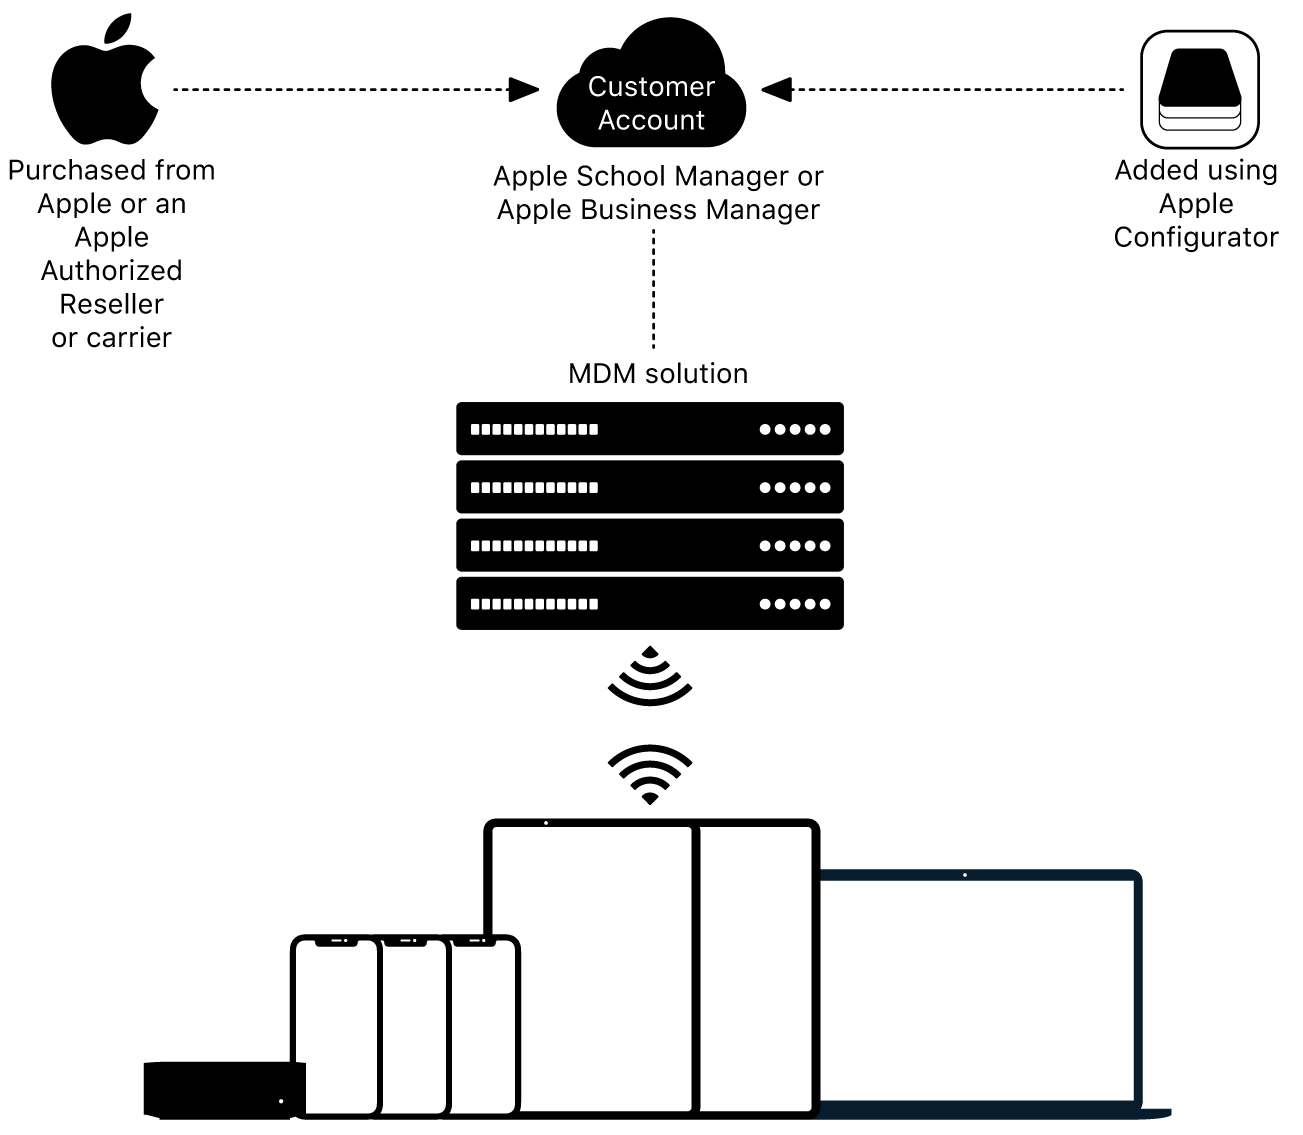 A diagram showing how devices are assigned to Apple School Manager or Apple Business Manager.